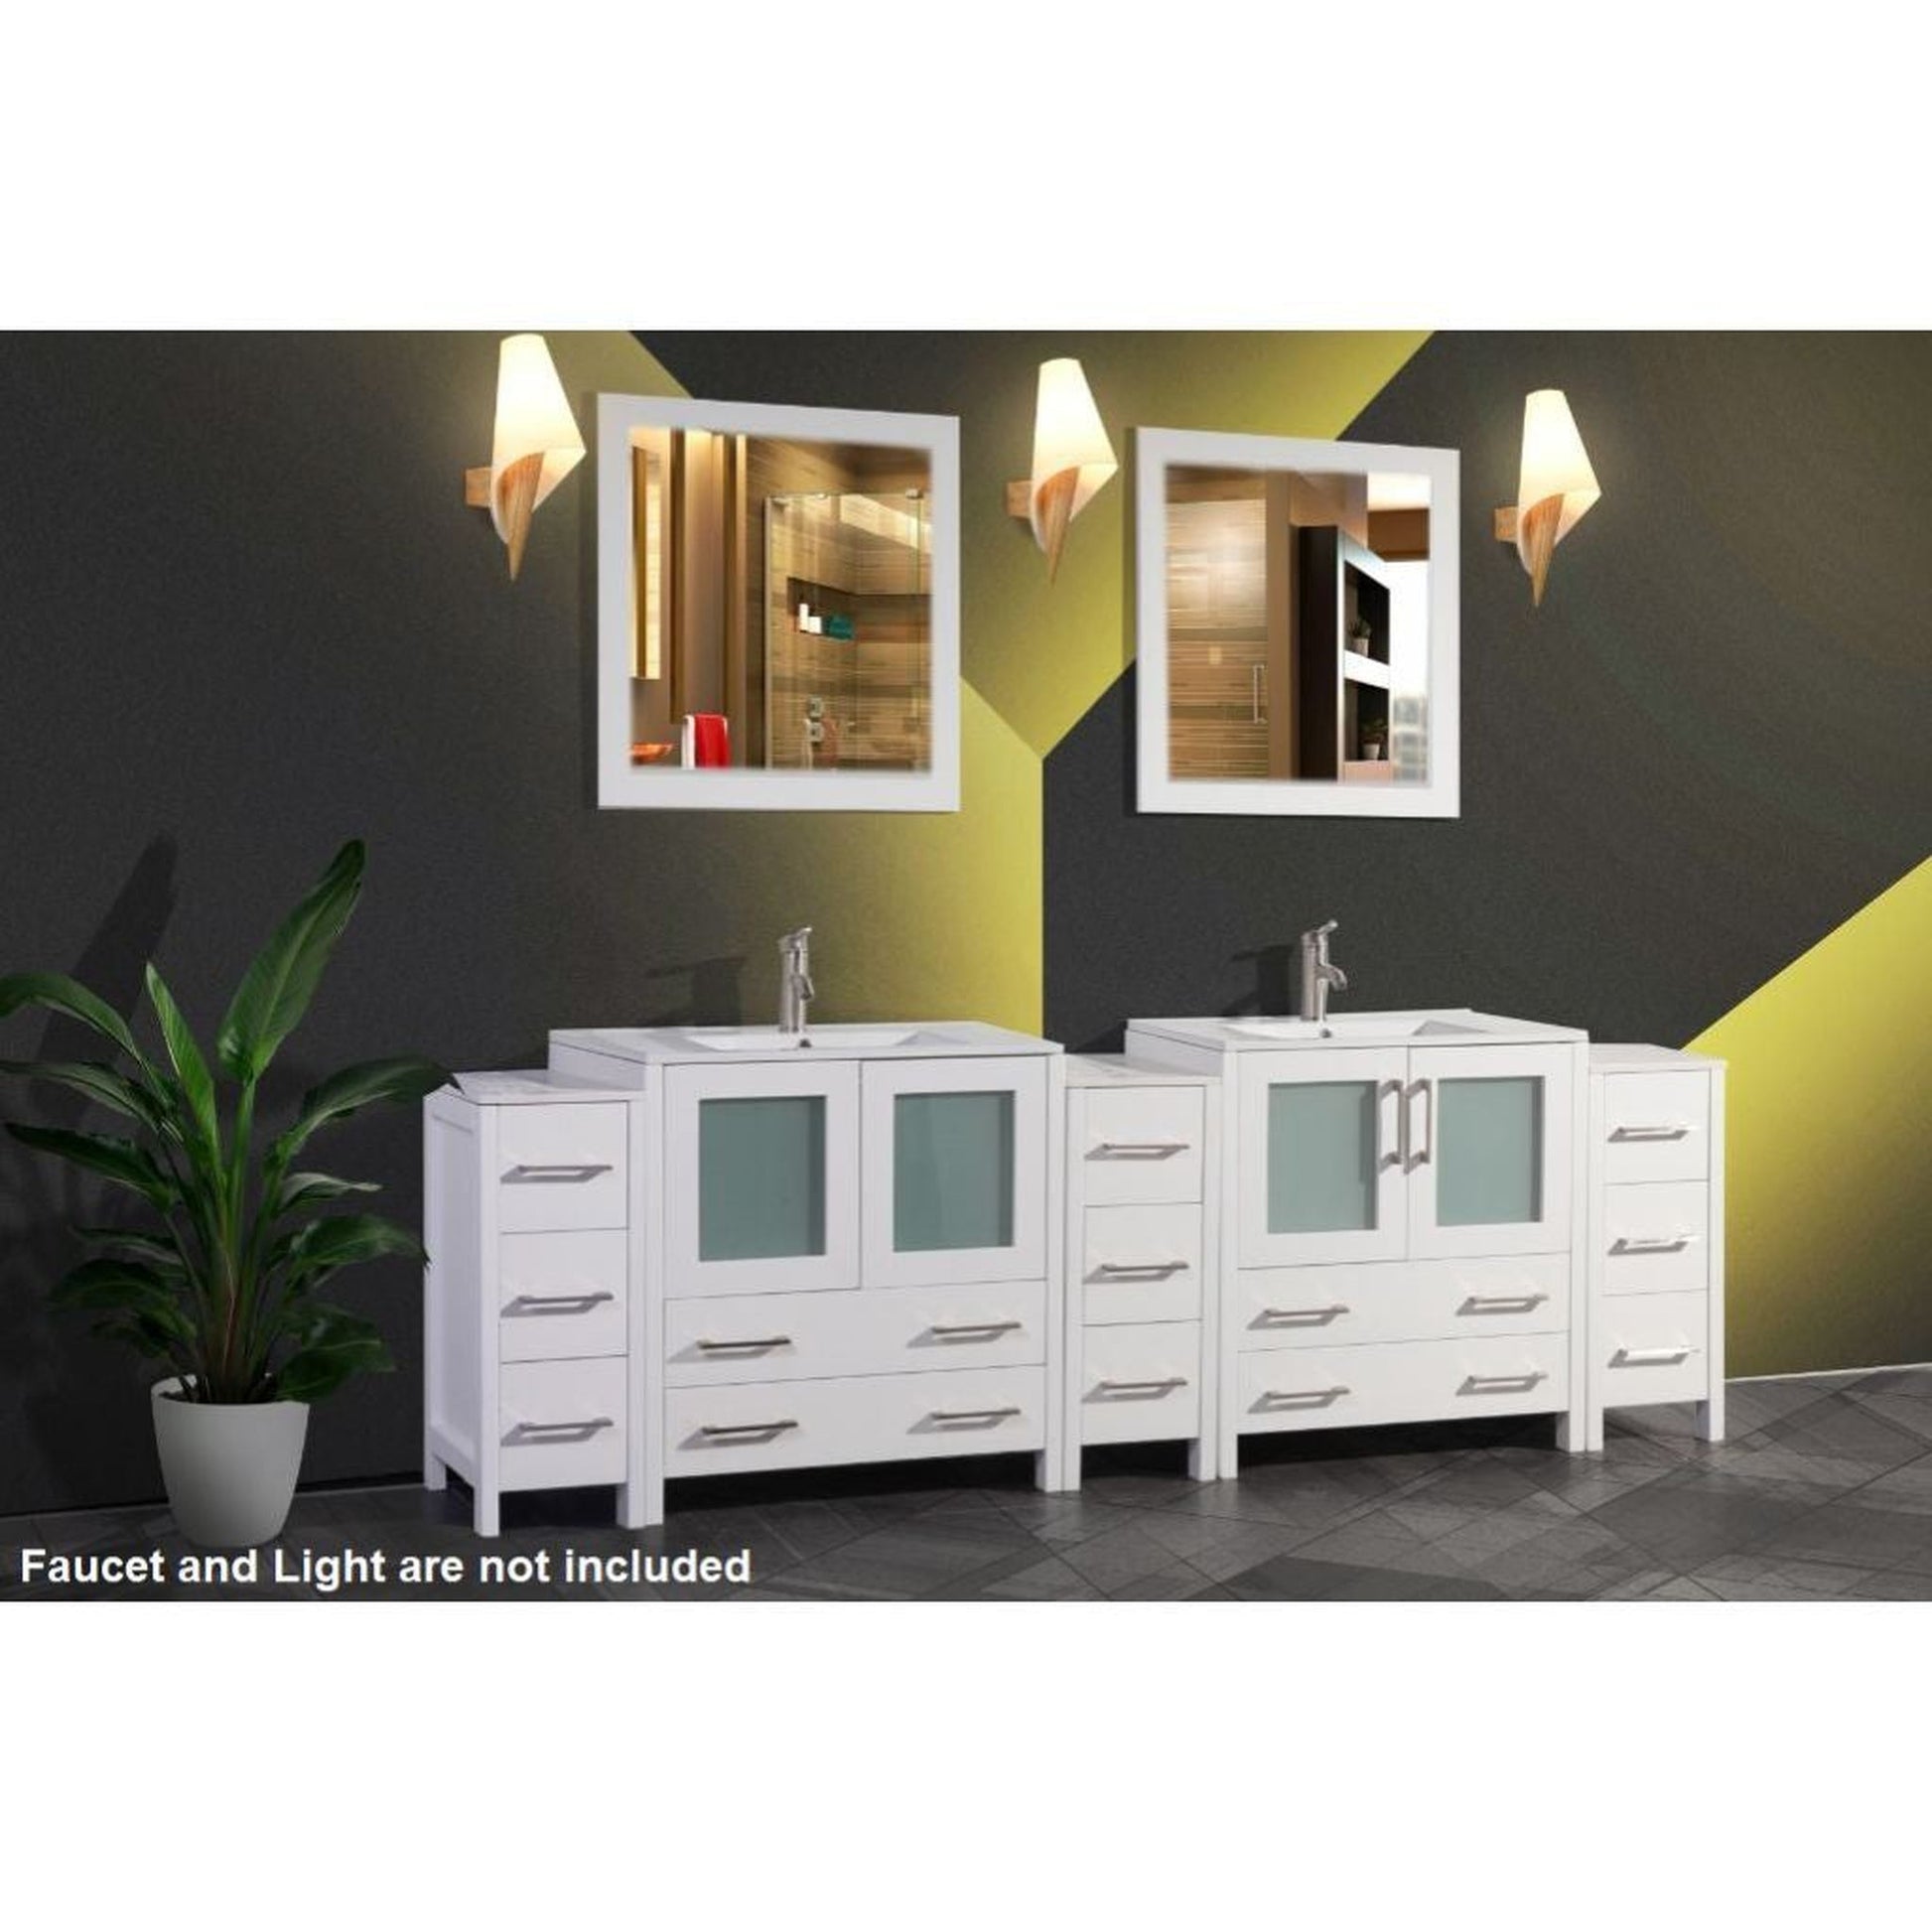 Vanity Art VA30 96" Double White Freestanding Modern Bathroom Vanity Set With Integrated Ceramic Sink, Compact 2 Shelves, 13 Dovetail Drawers Cabinet And 2 Mirrors